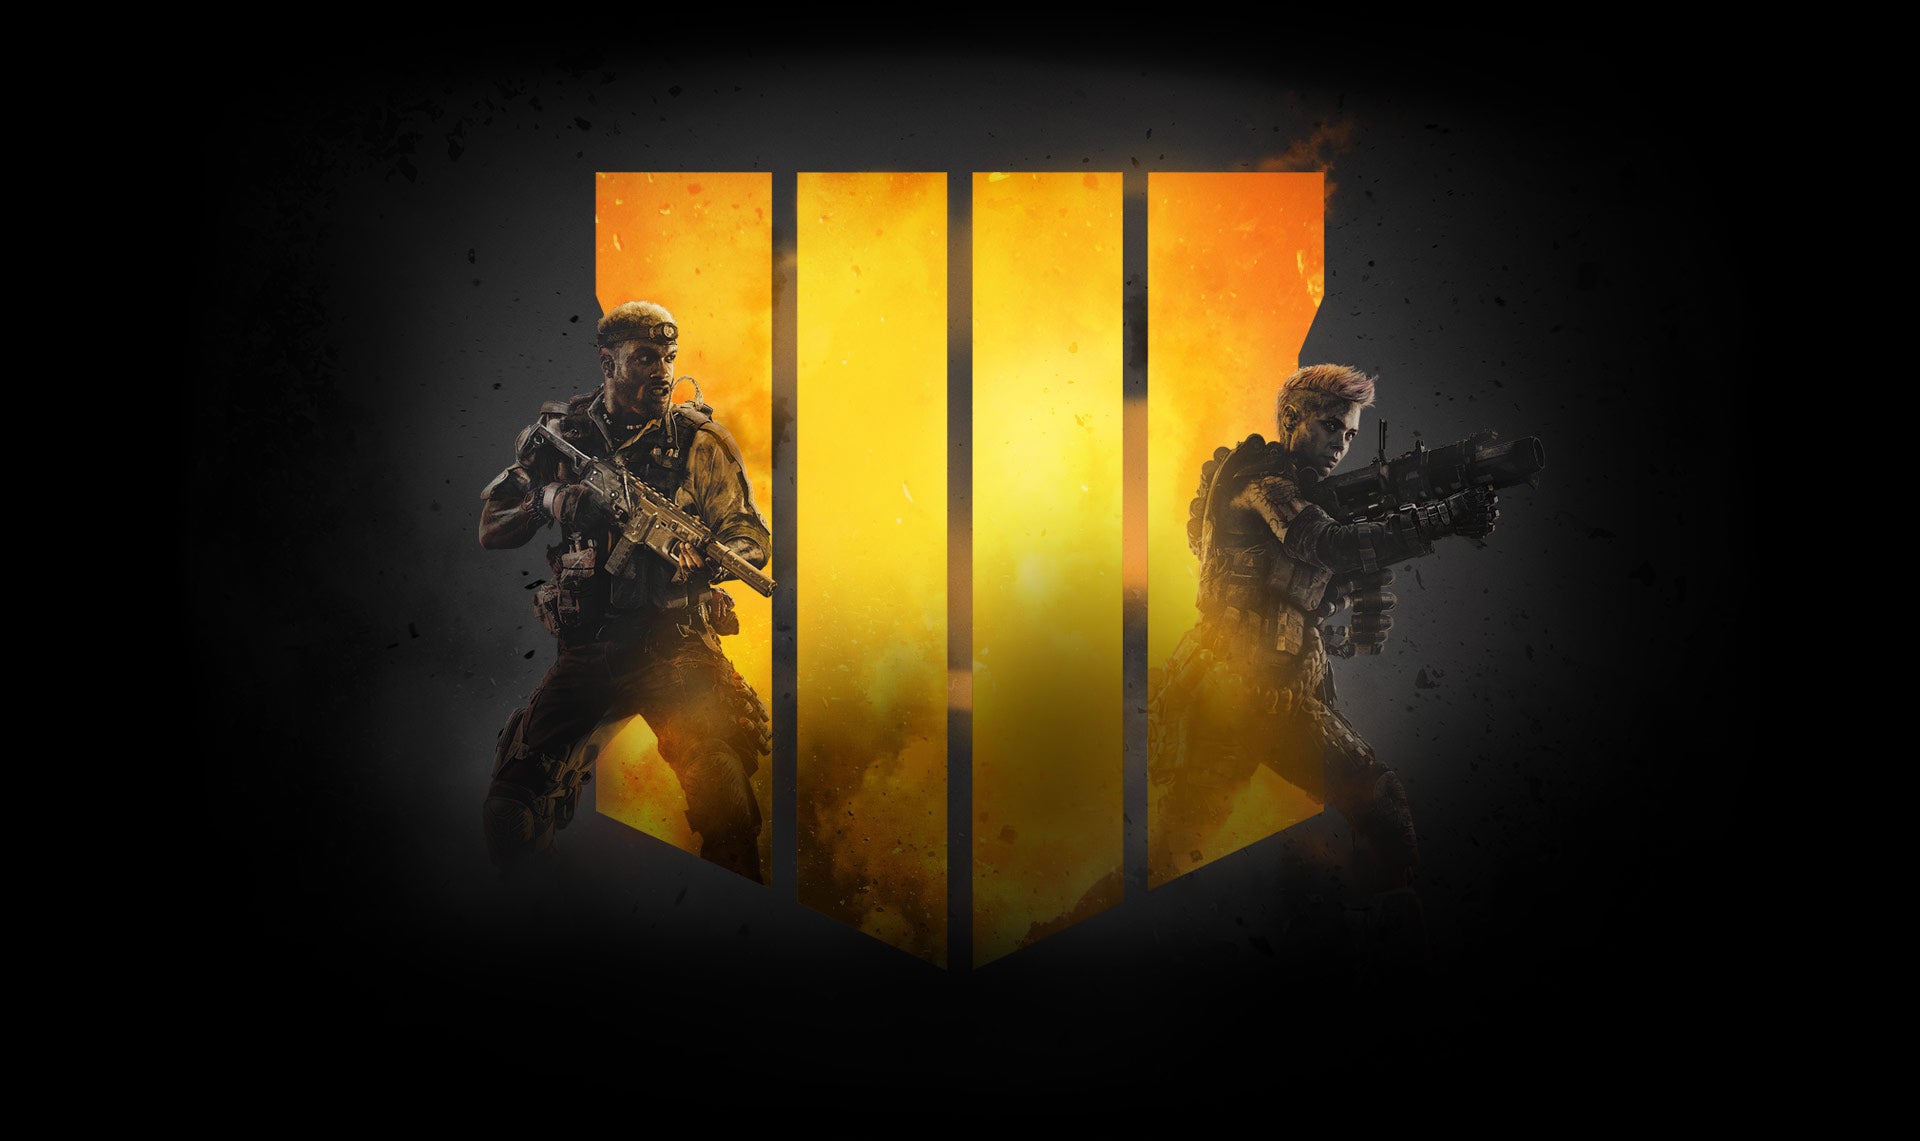 Image for Call of Duty: Black Ops 4 more anticipated than Red Dead Redemption 2 this holiday - survey